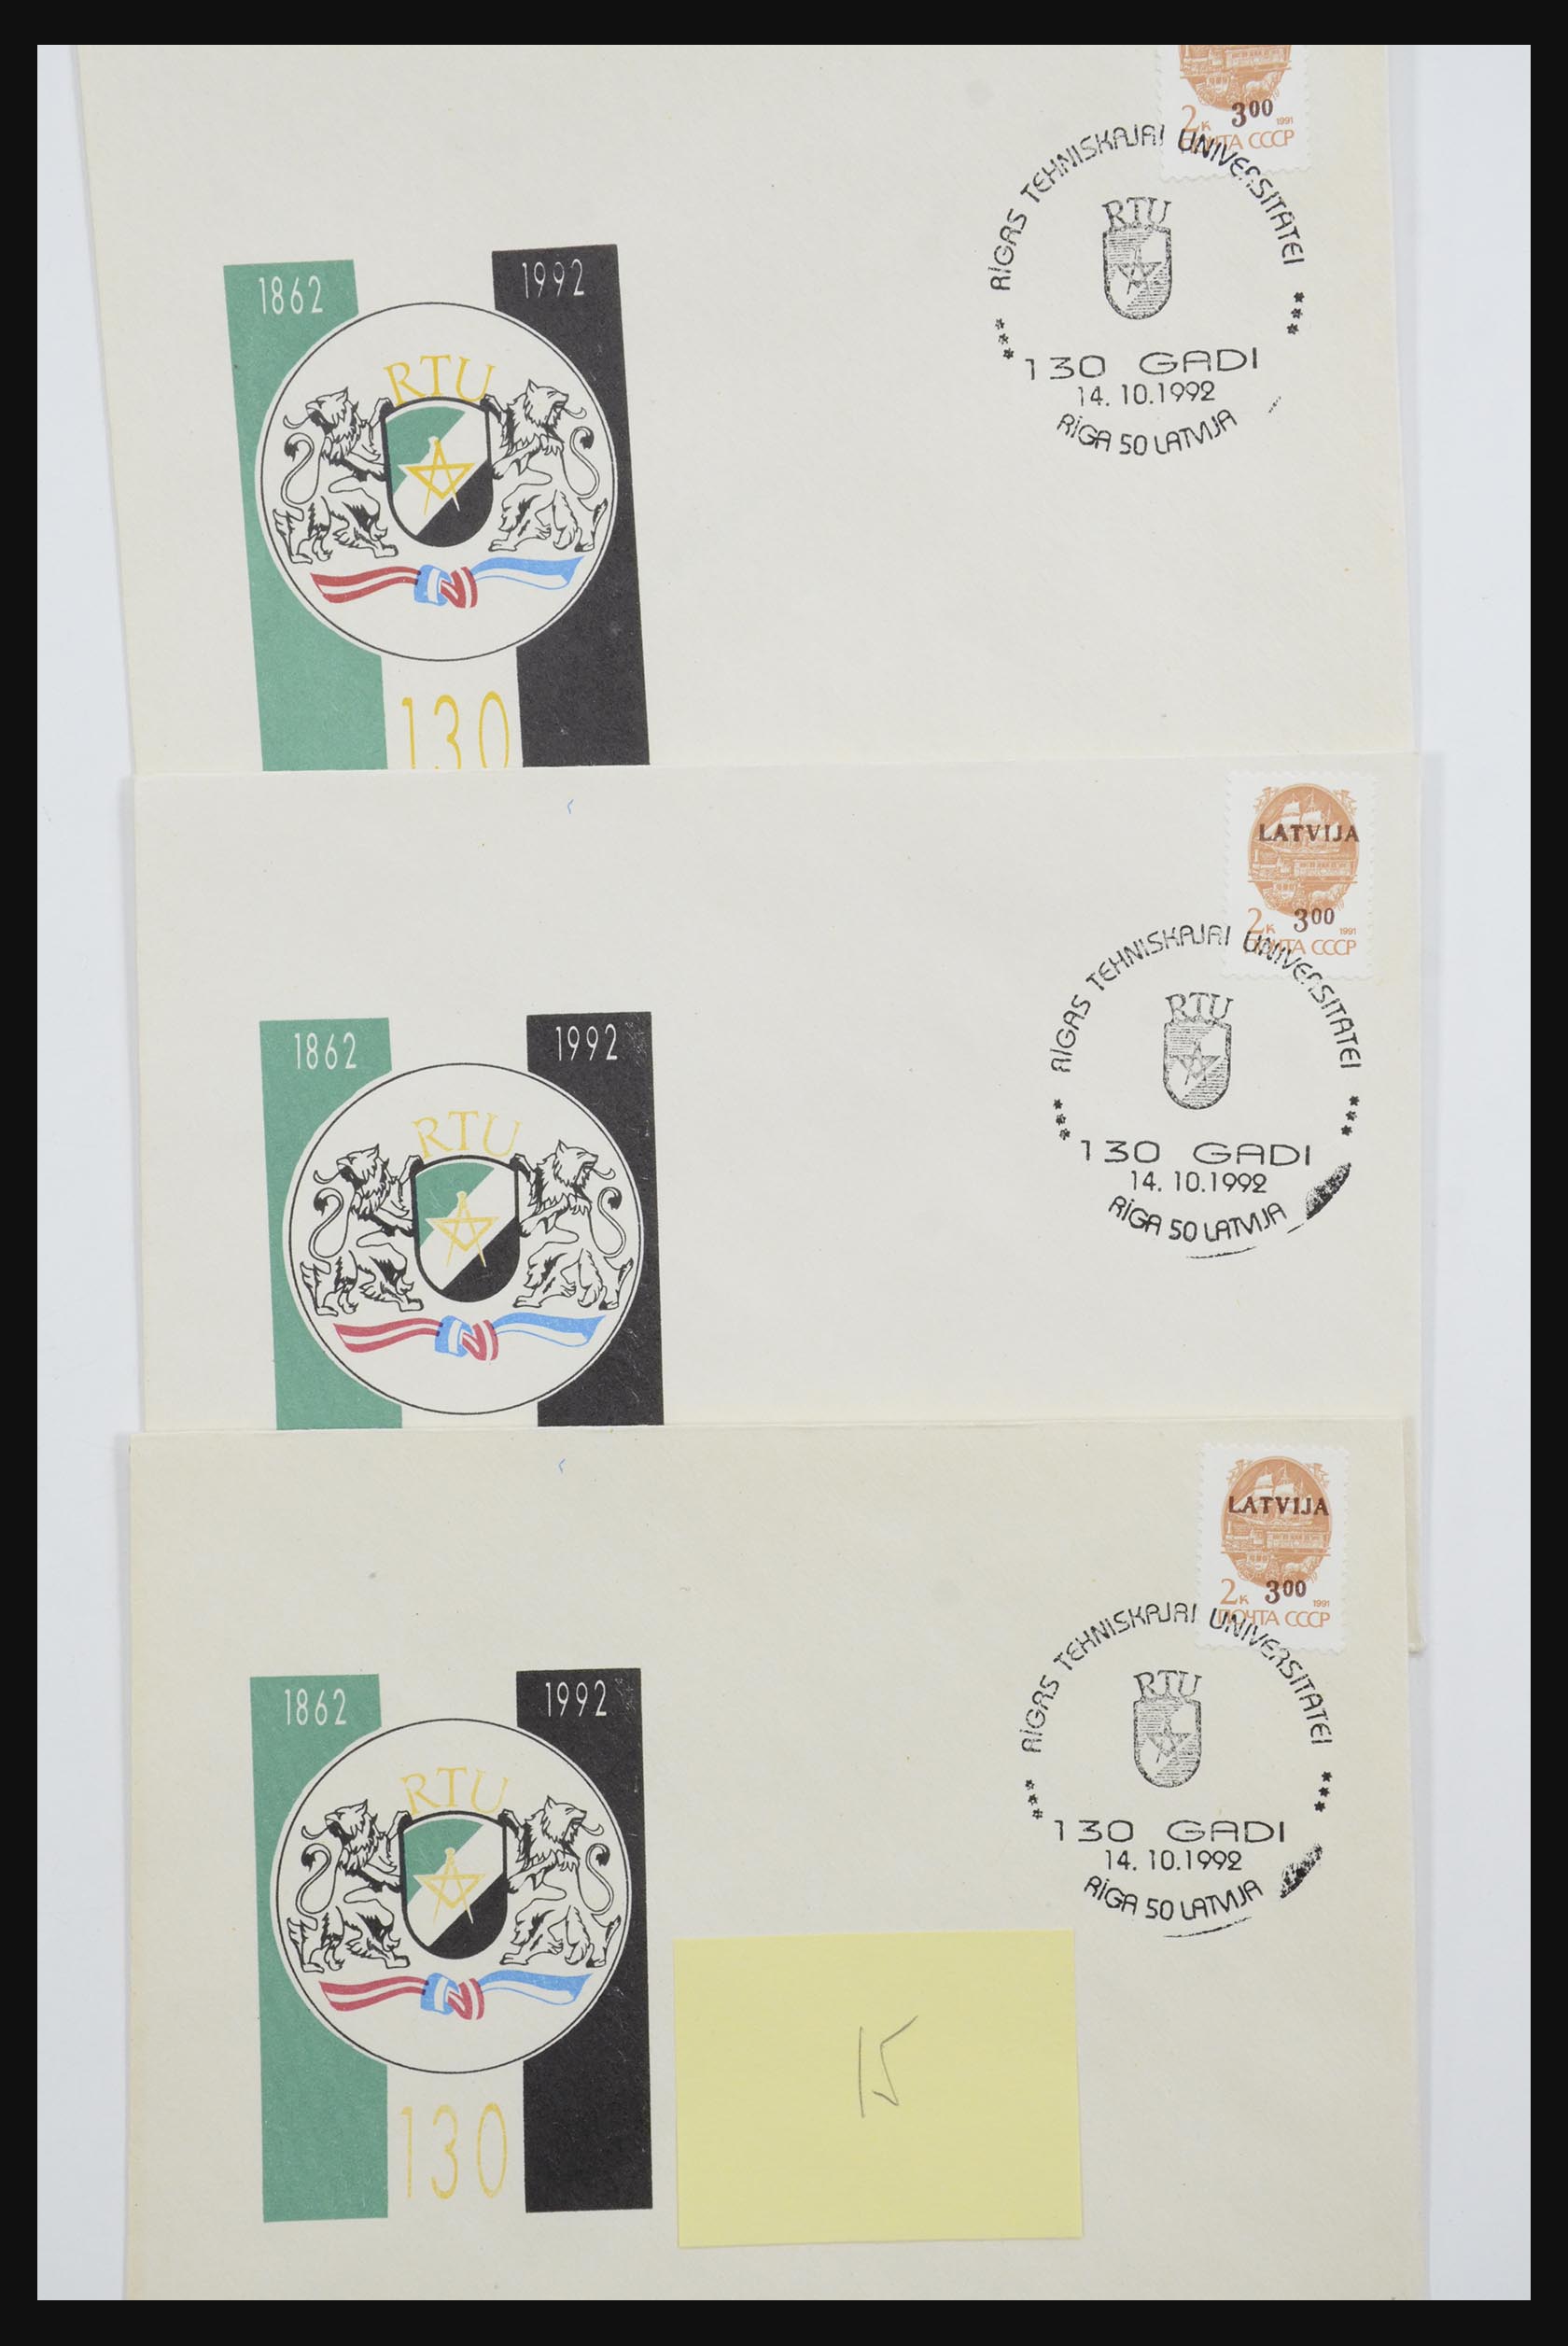 31584 628 - 31584 Latvia covers/FDC's and postal stationeries 1990-1992.